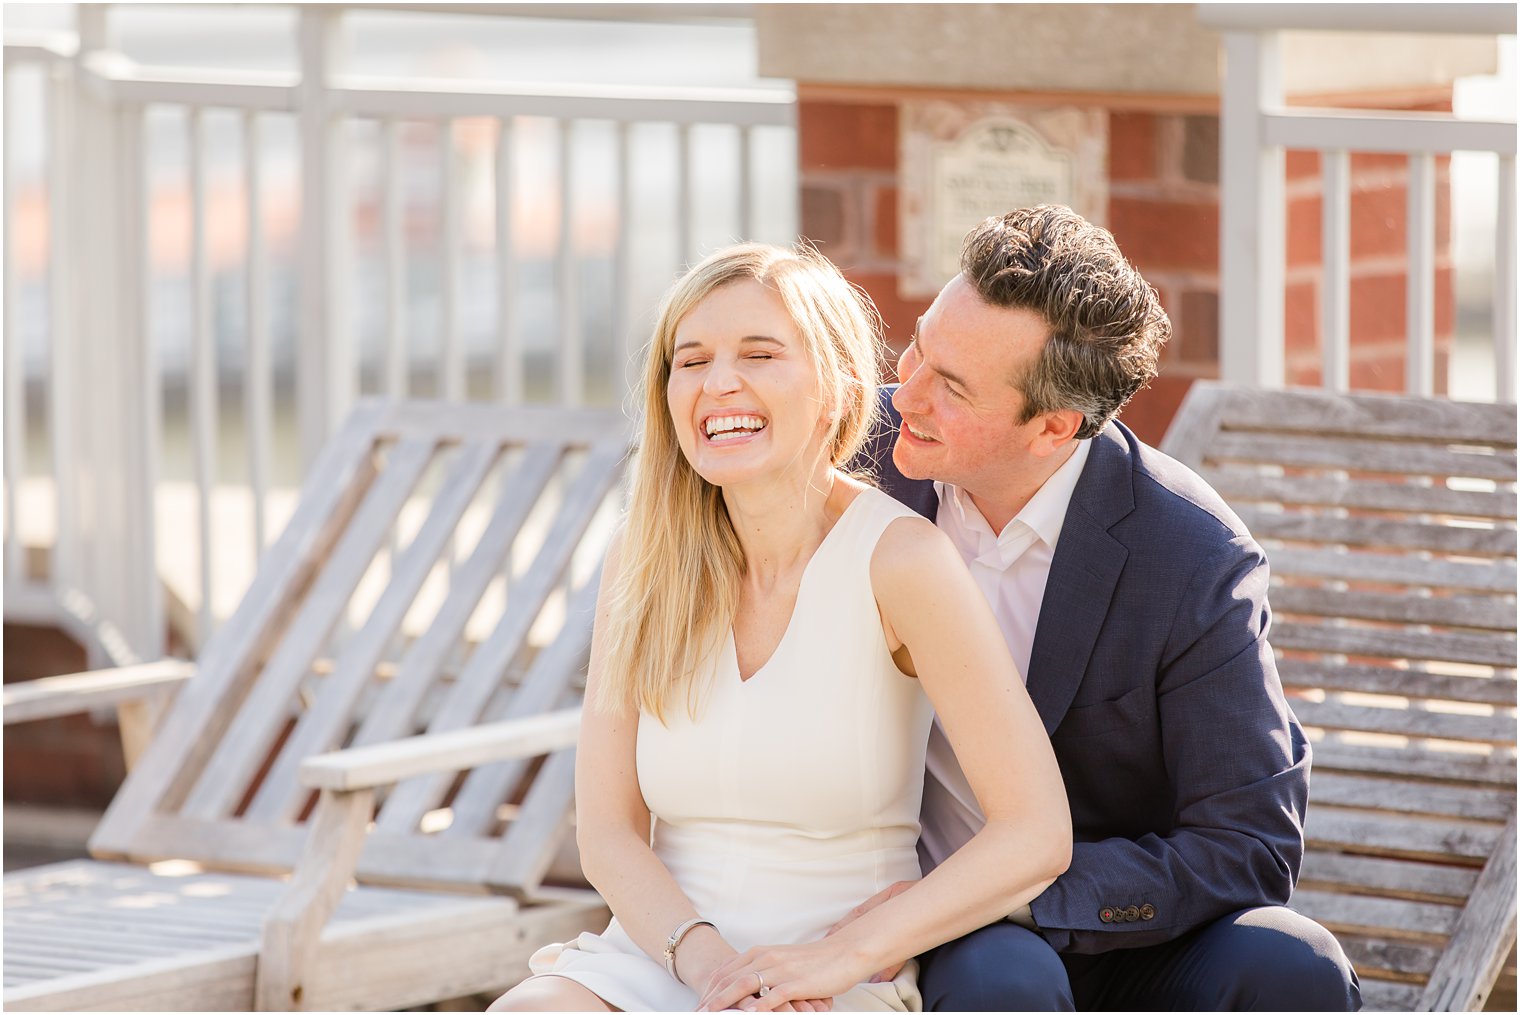 Natural expressions during Hoboken Rooftop Engagement by Idalia Photography